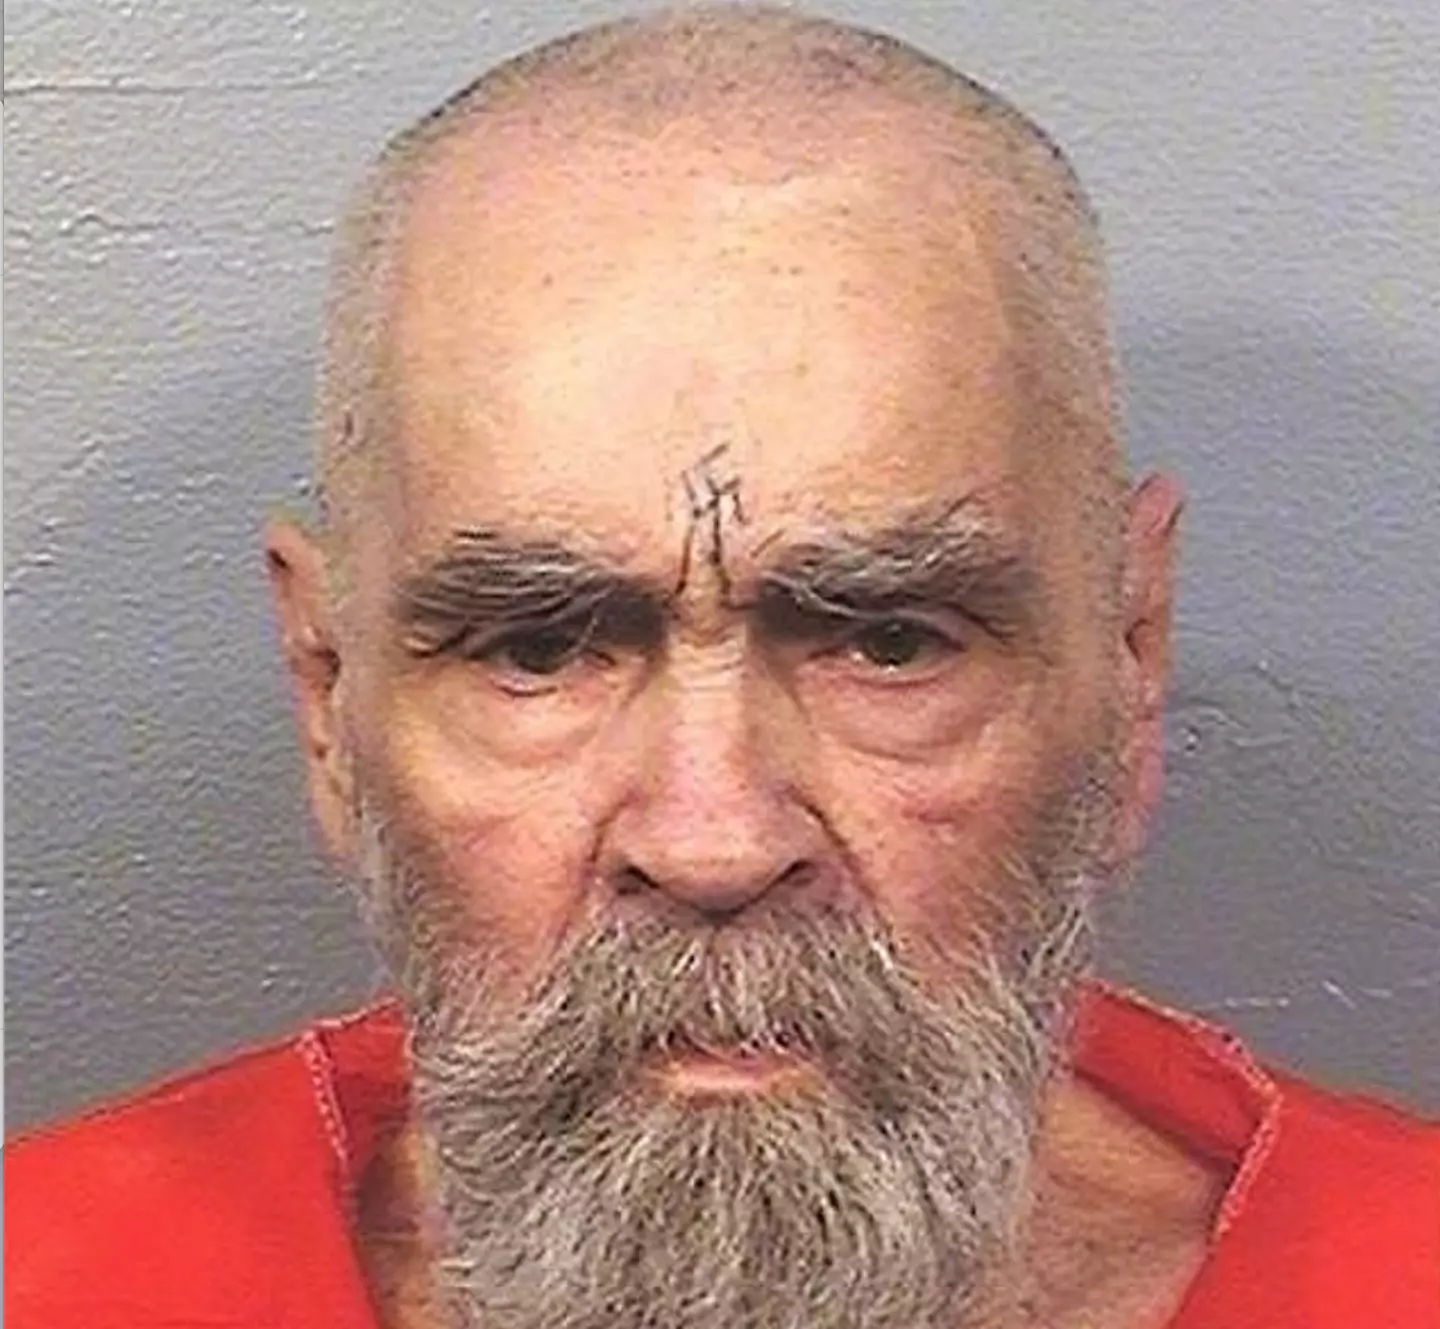 Charles Manson died of colon cancel in 2017 at the age of 83.